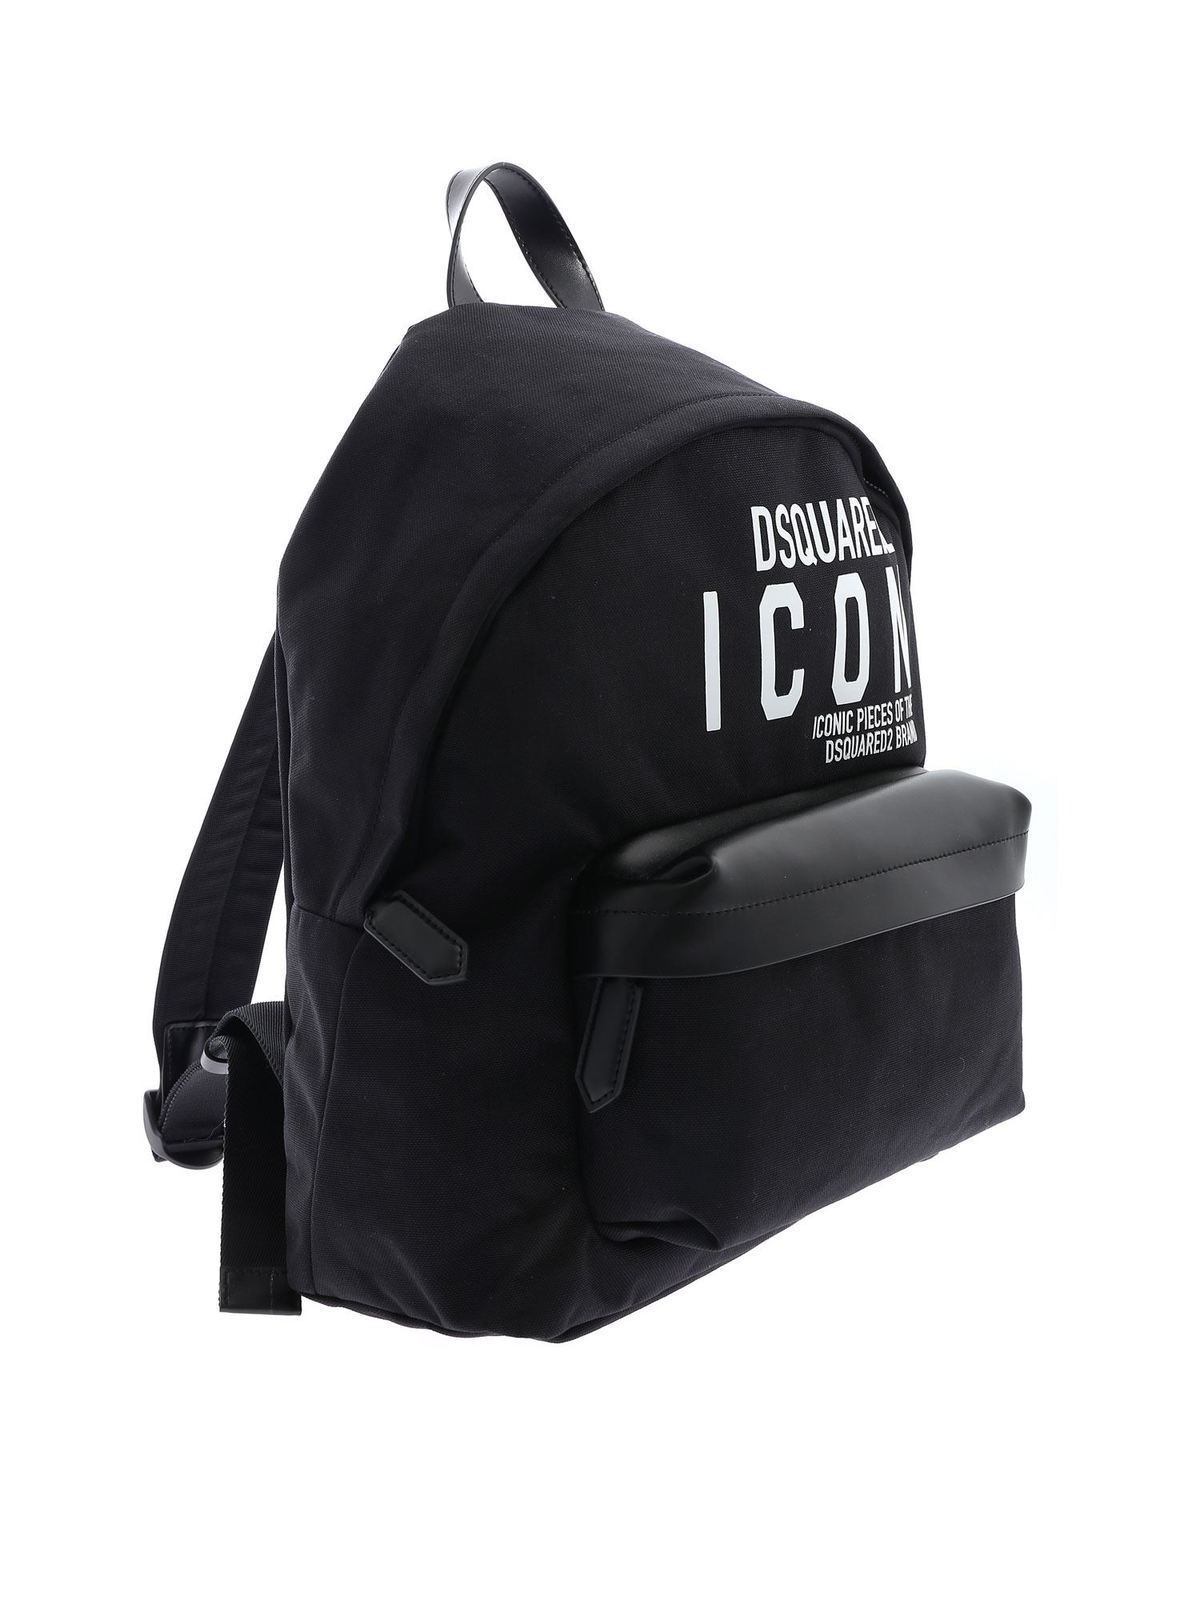 Backpacks Dsquared2 - Dsquared2 Icon backpack in black ...